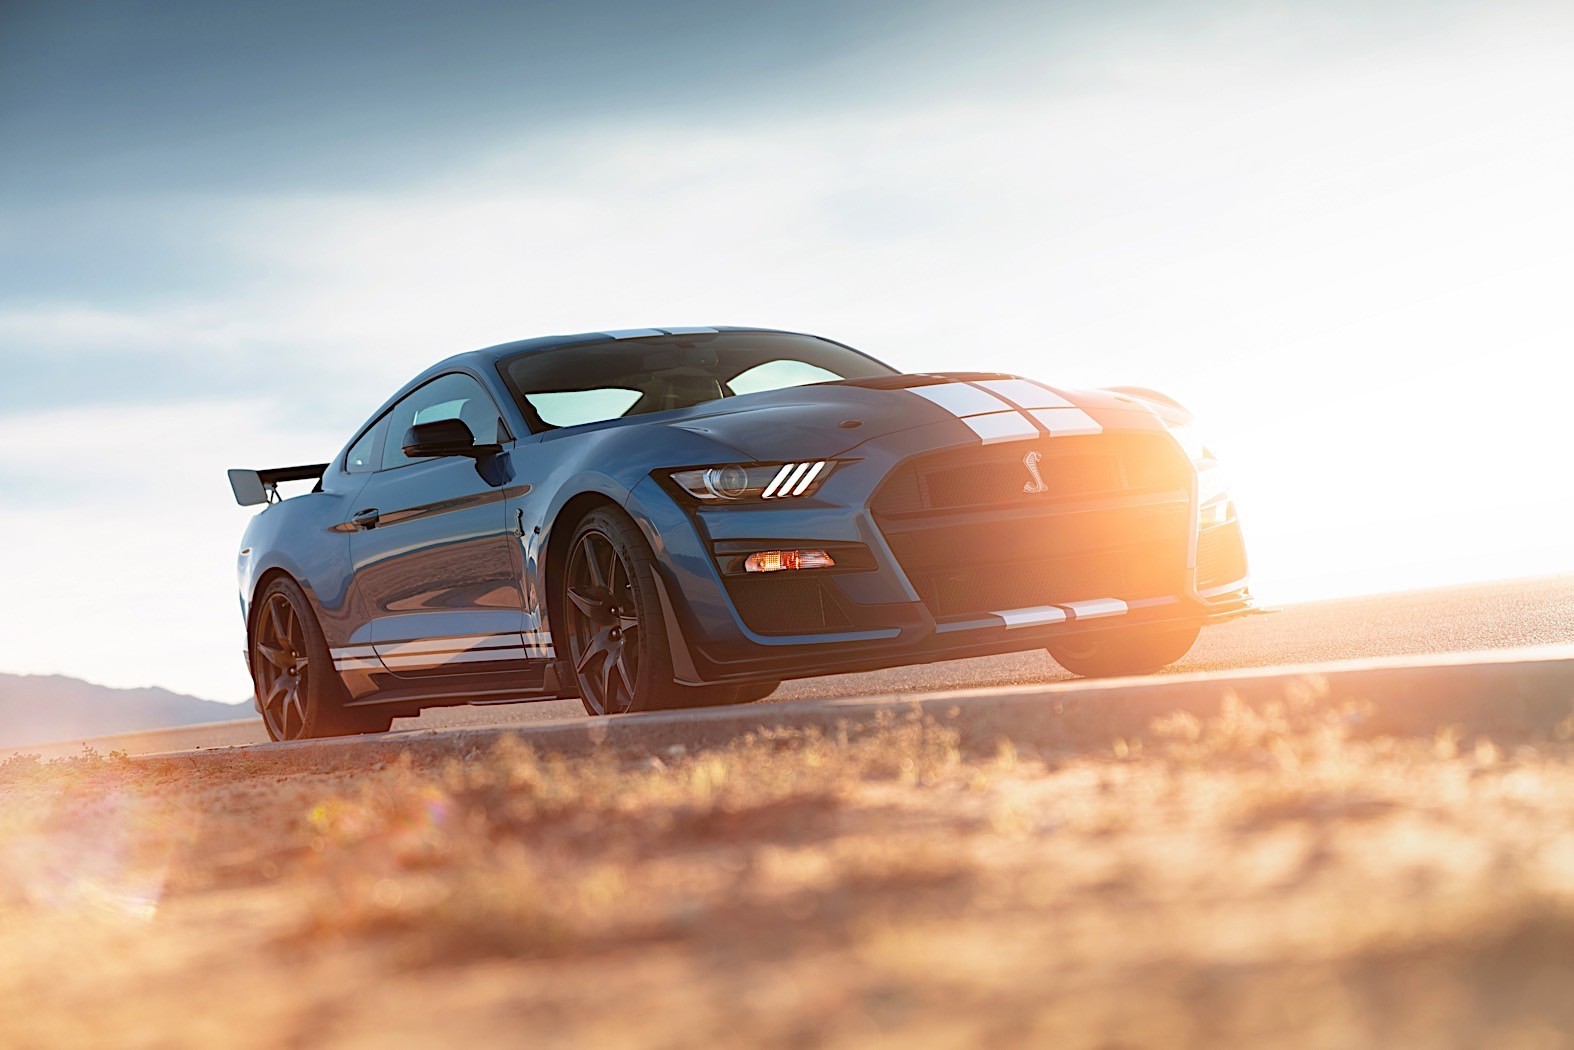 2020 Ford Mustang Shelby Gt500 Hp Review